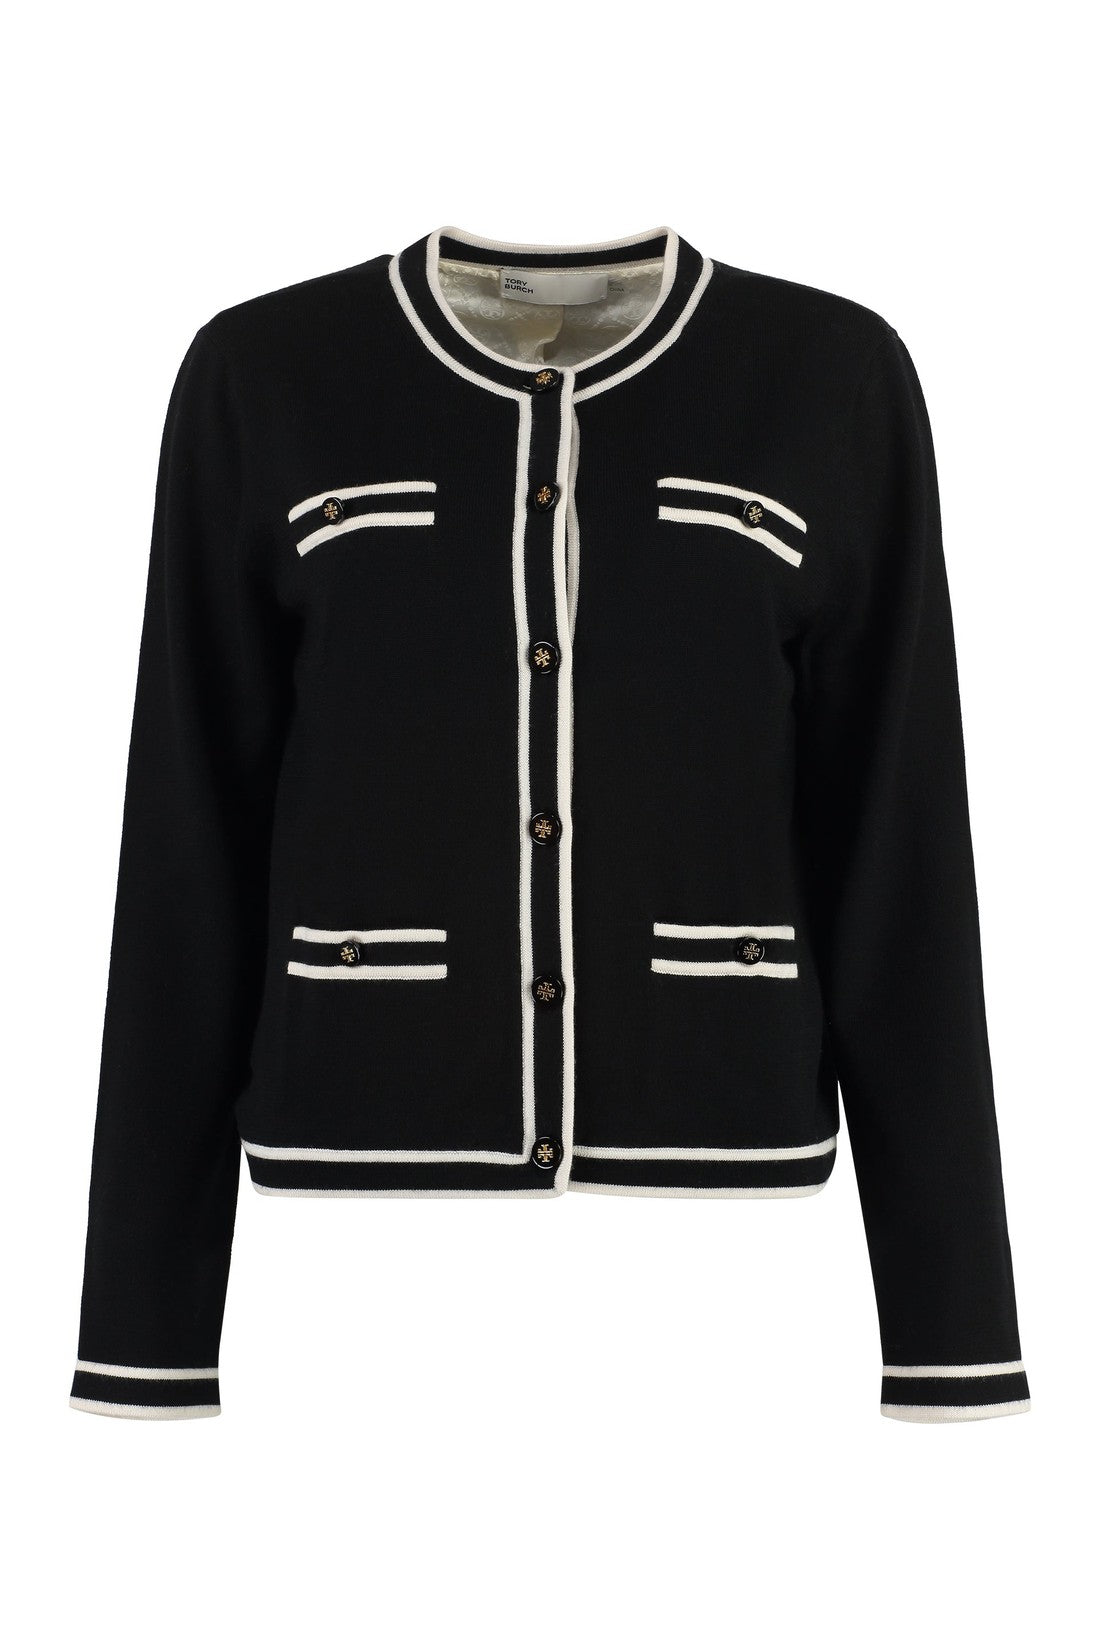 Tory Burch-OUTLET-SALE-Merino wool cardigan-ARCHIVIST